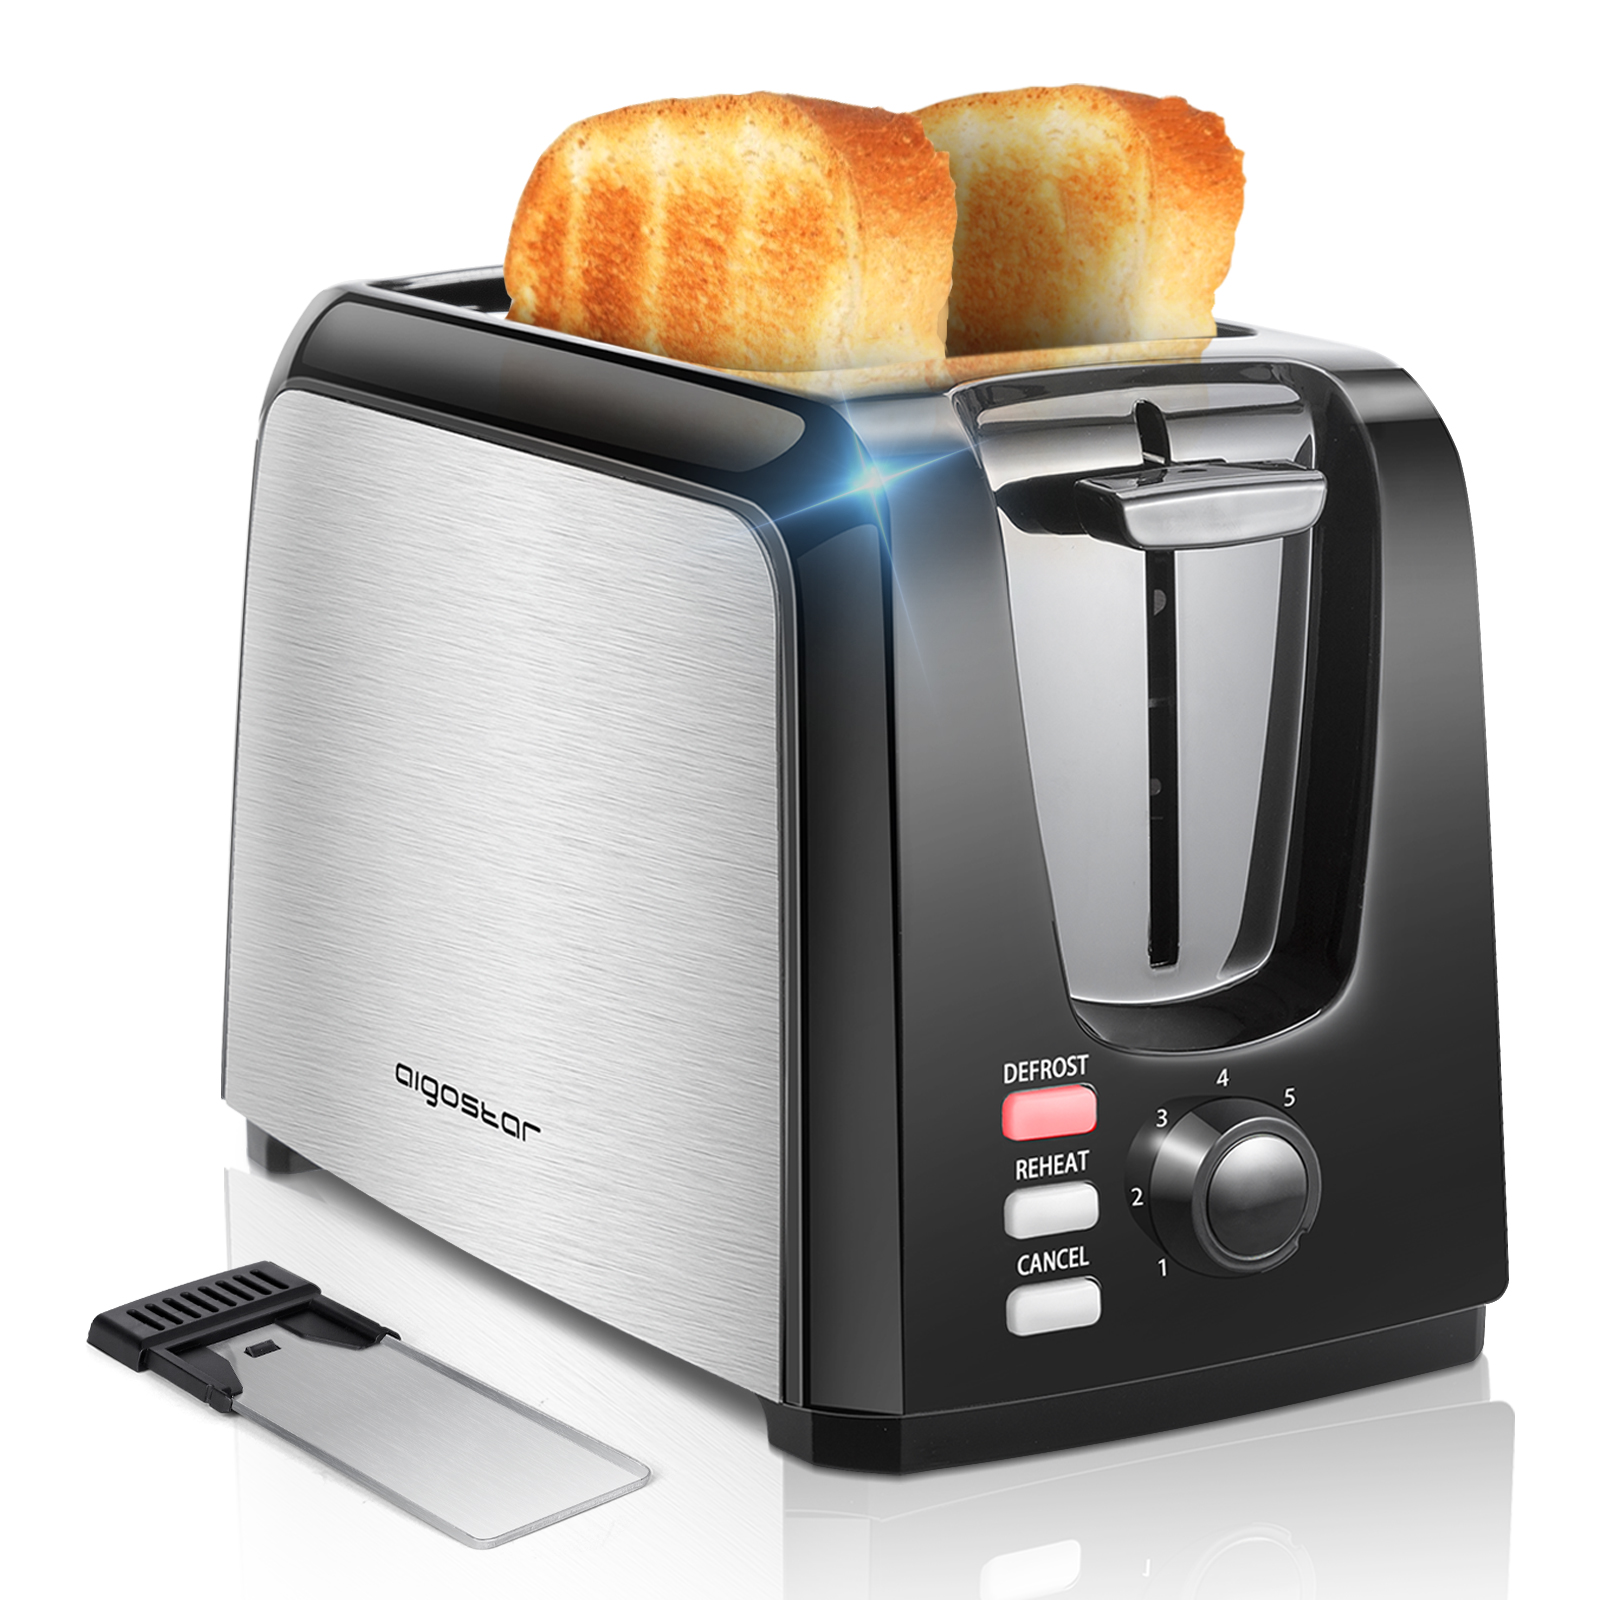 Toaster 2 Slice Wide Slot 2 Slice Toaster Best Rated with Bagel/Defrost/Cancel Function Cool Touch Black Toaster for Bread Bagel with Removable Crumb Tray 